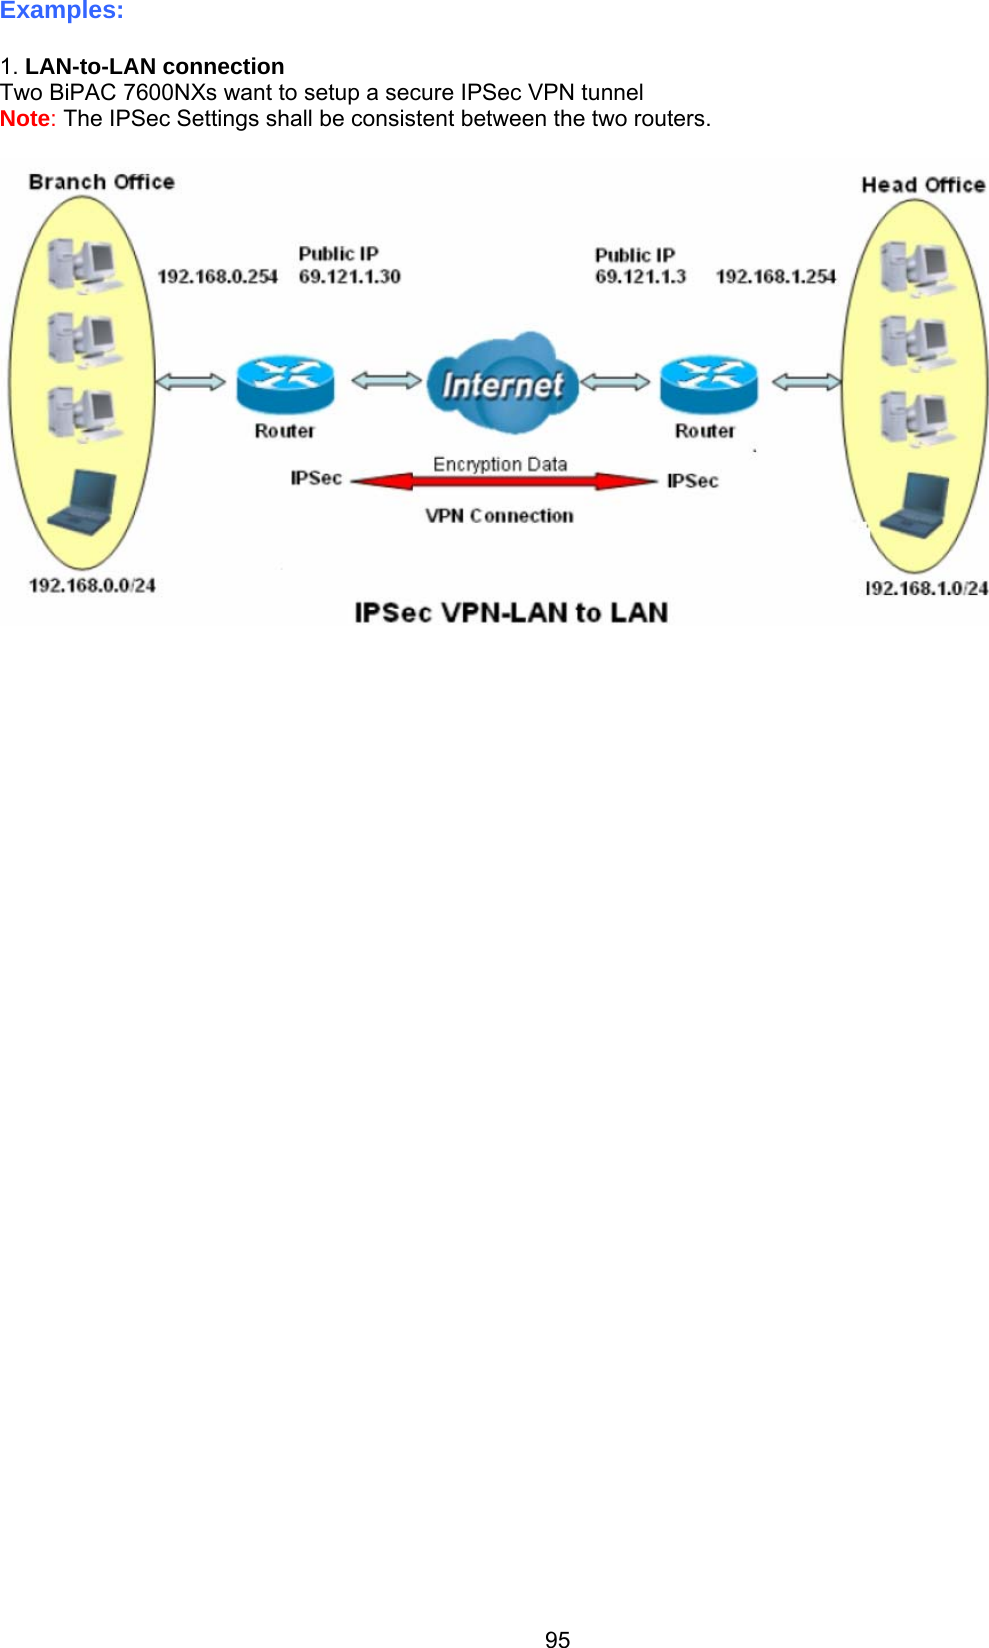 95 Examples:   1. LAN-to-LAN connection Two BiPAC 7600NXs want to setup a secure IPSec VPN tunnel  Note: The IPSec Settings shall be consistent between the two routers.    